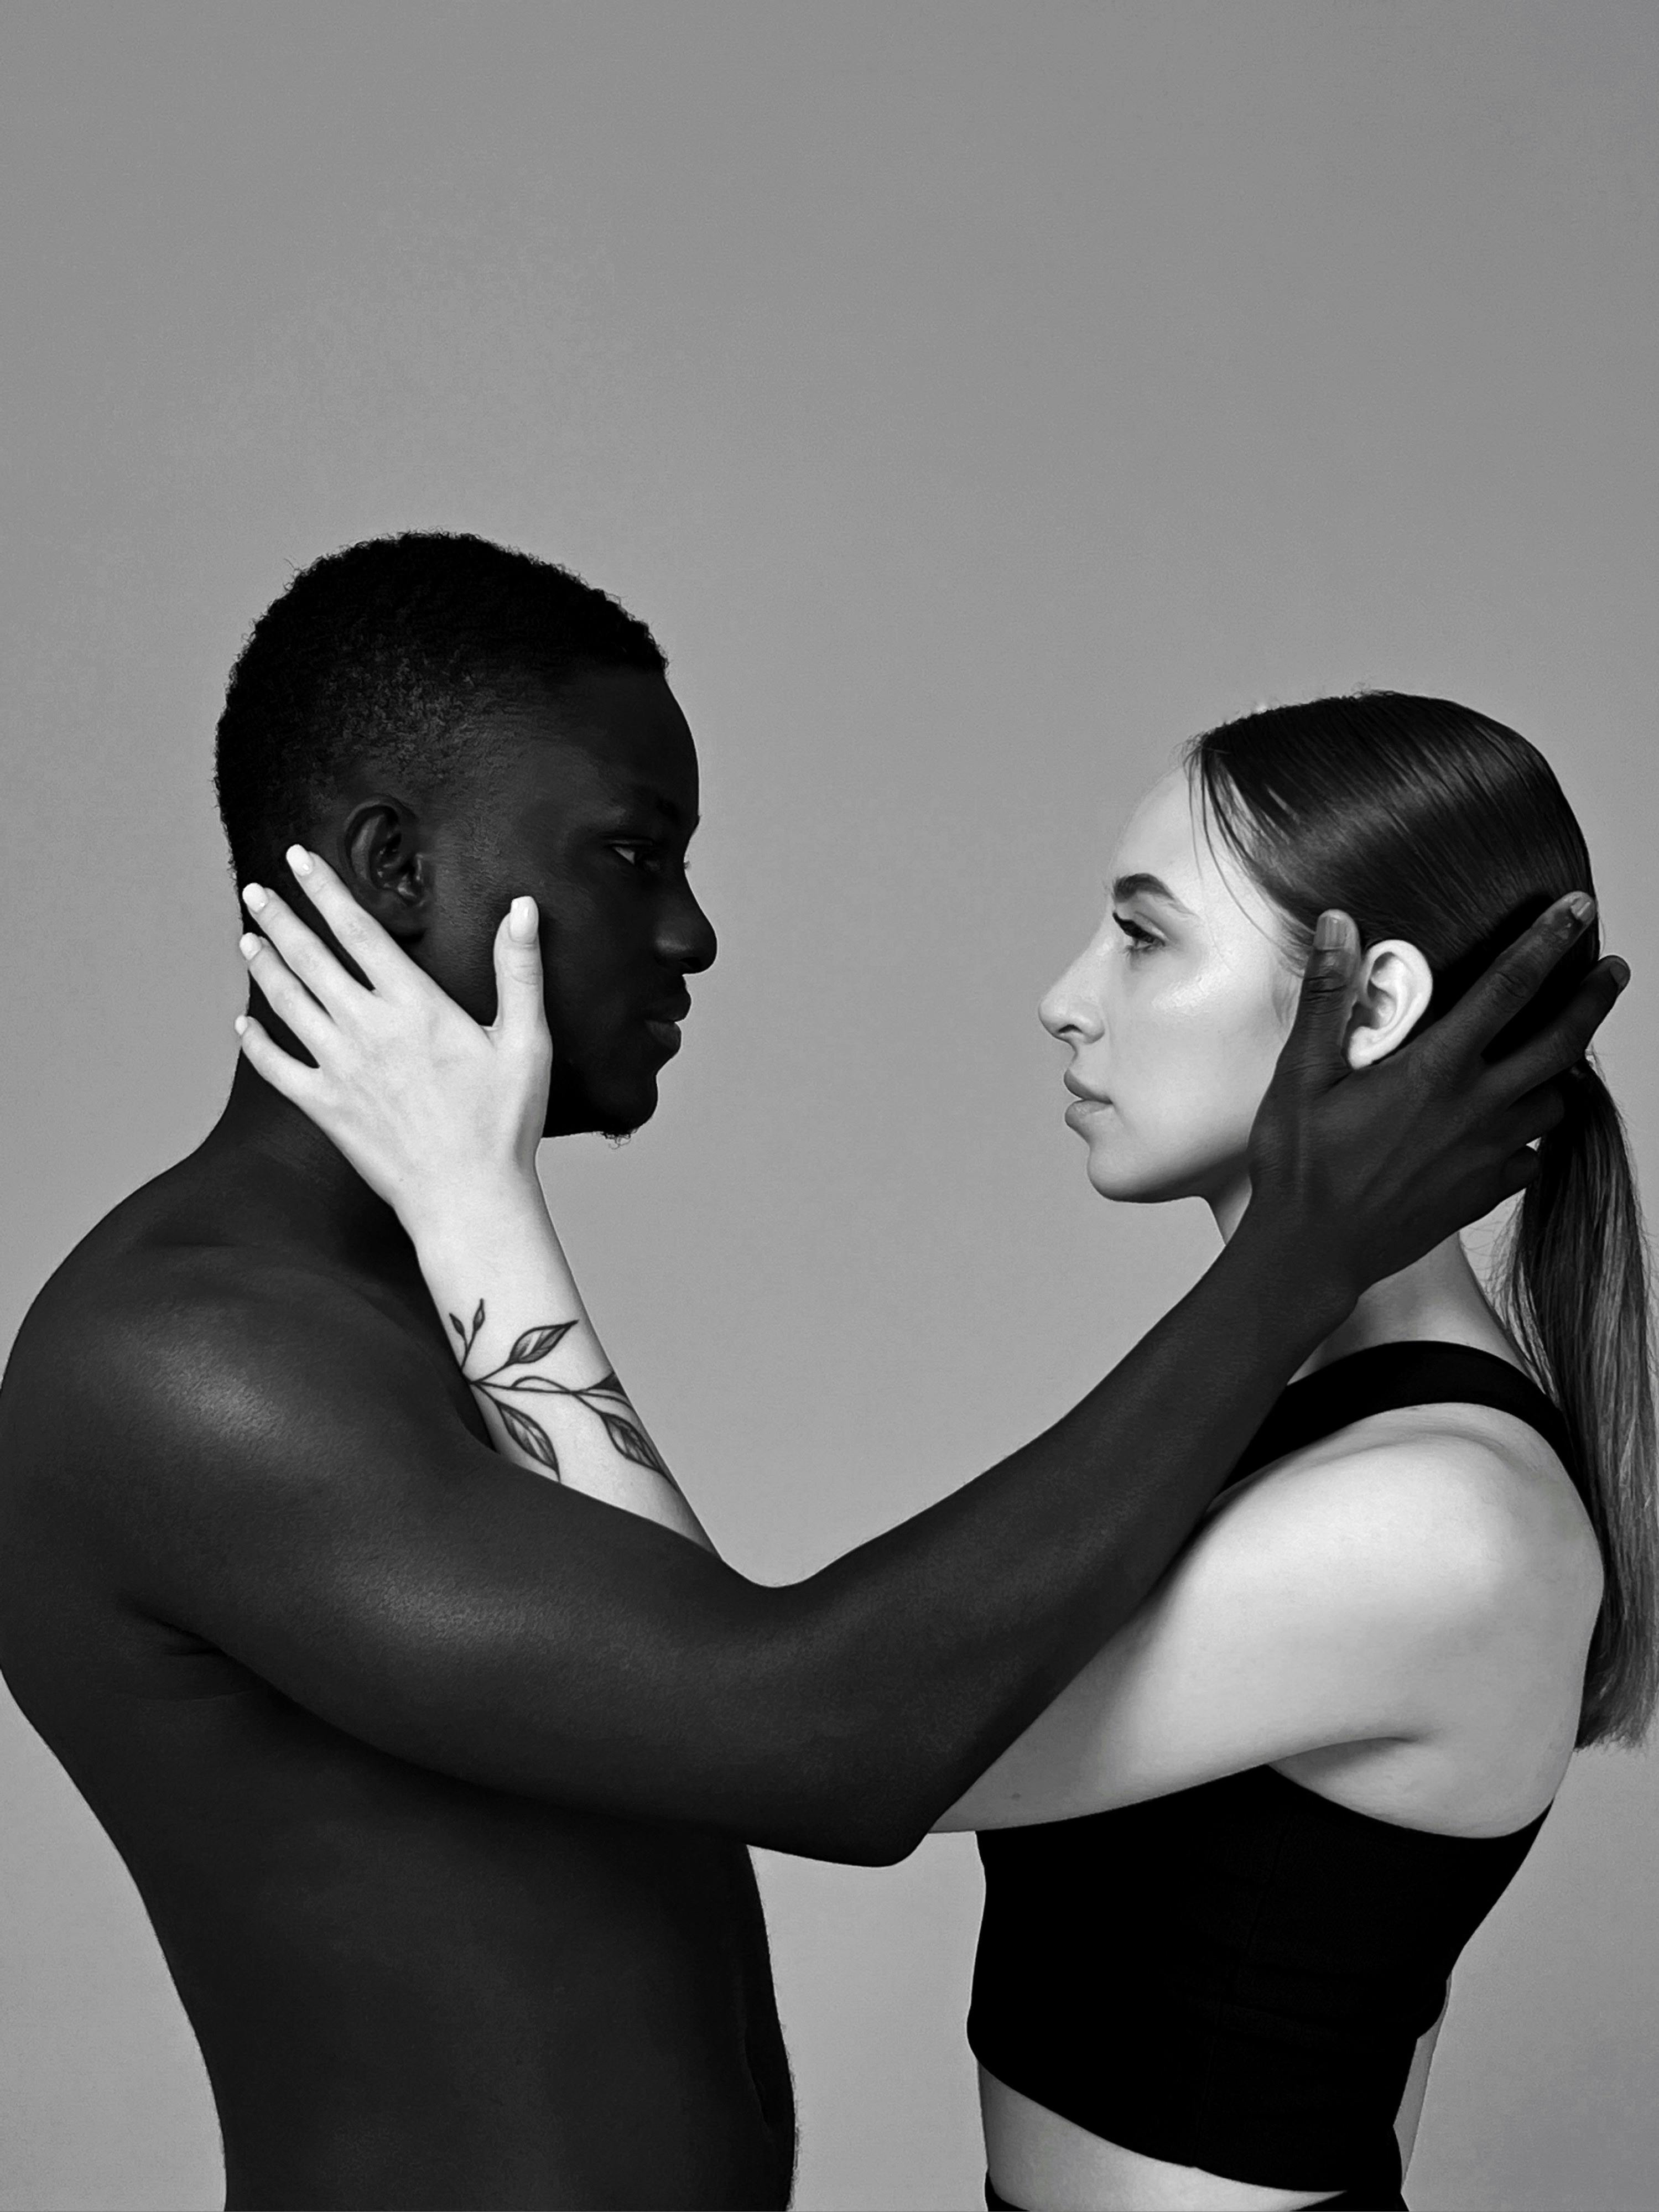 Studio Shoot of a Black Man and White Woman Embracing Each Other · Free Stock Photo picture